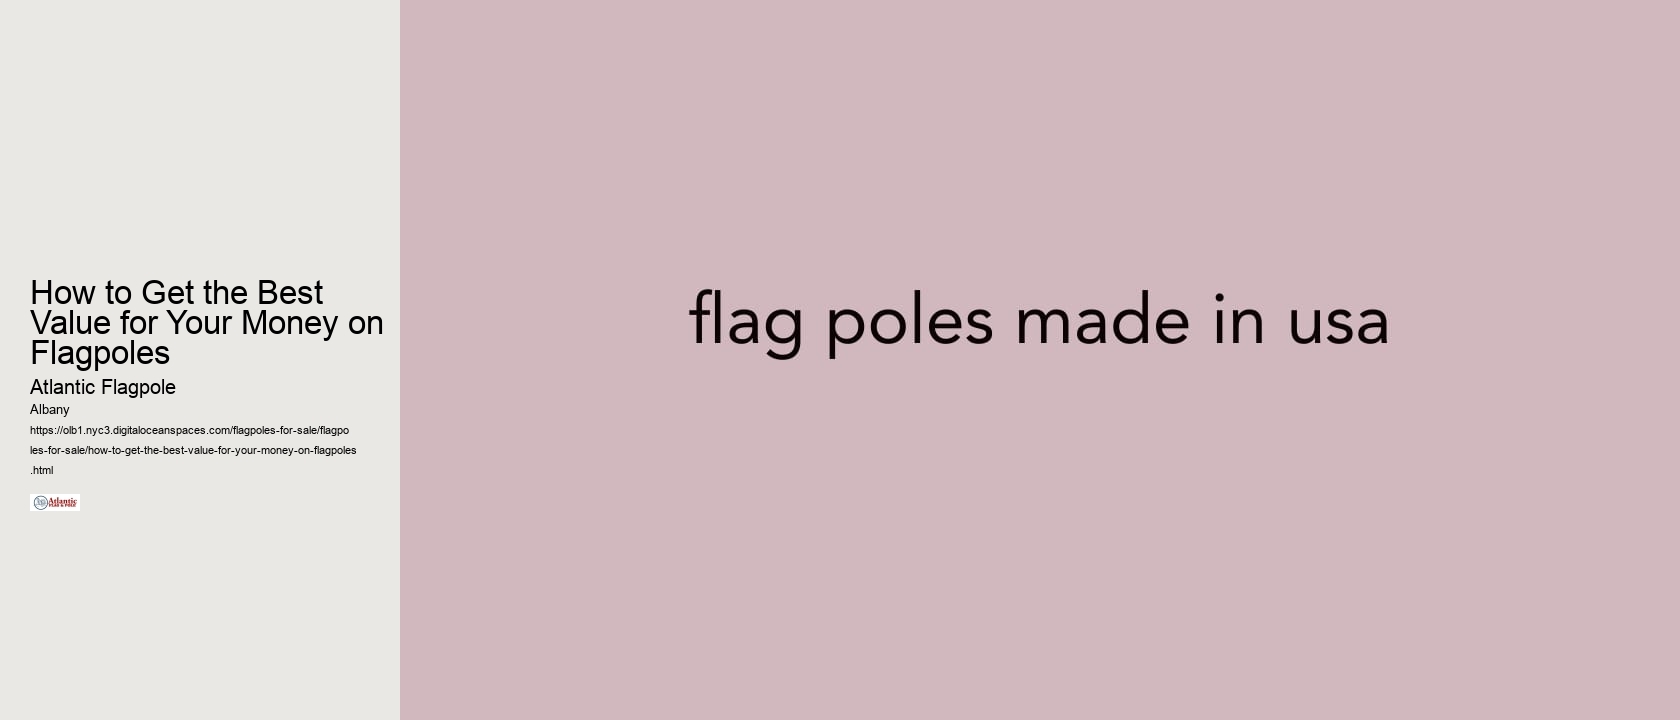 How to Get the Best Value for Your Money on Flagpoles